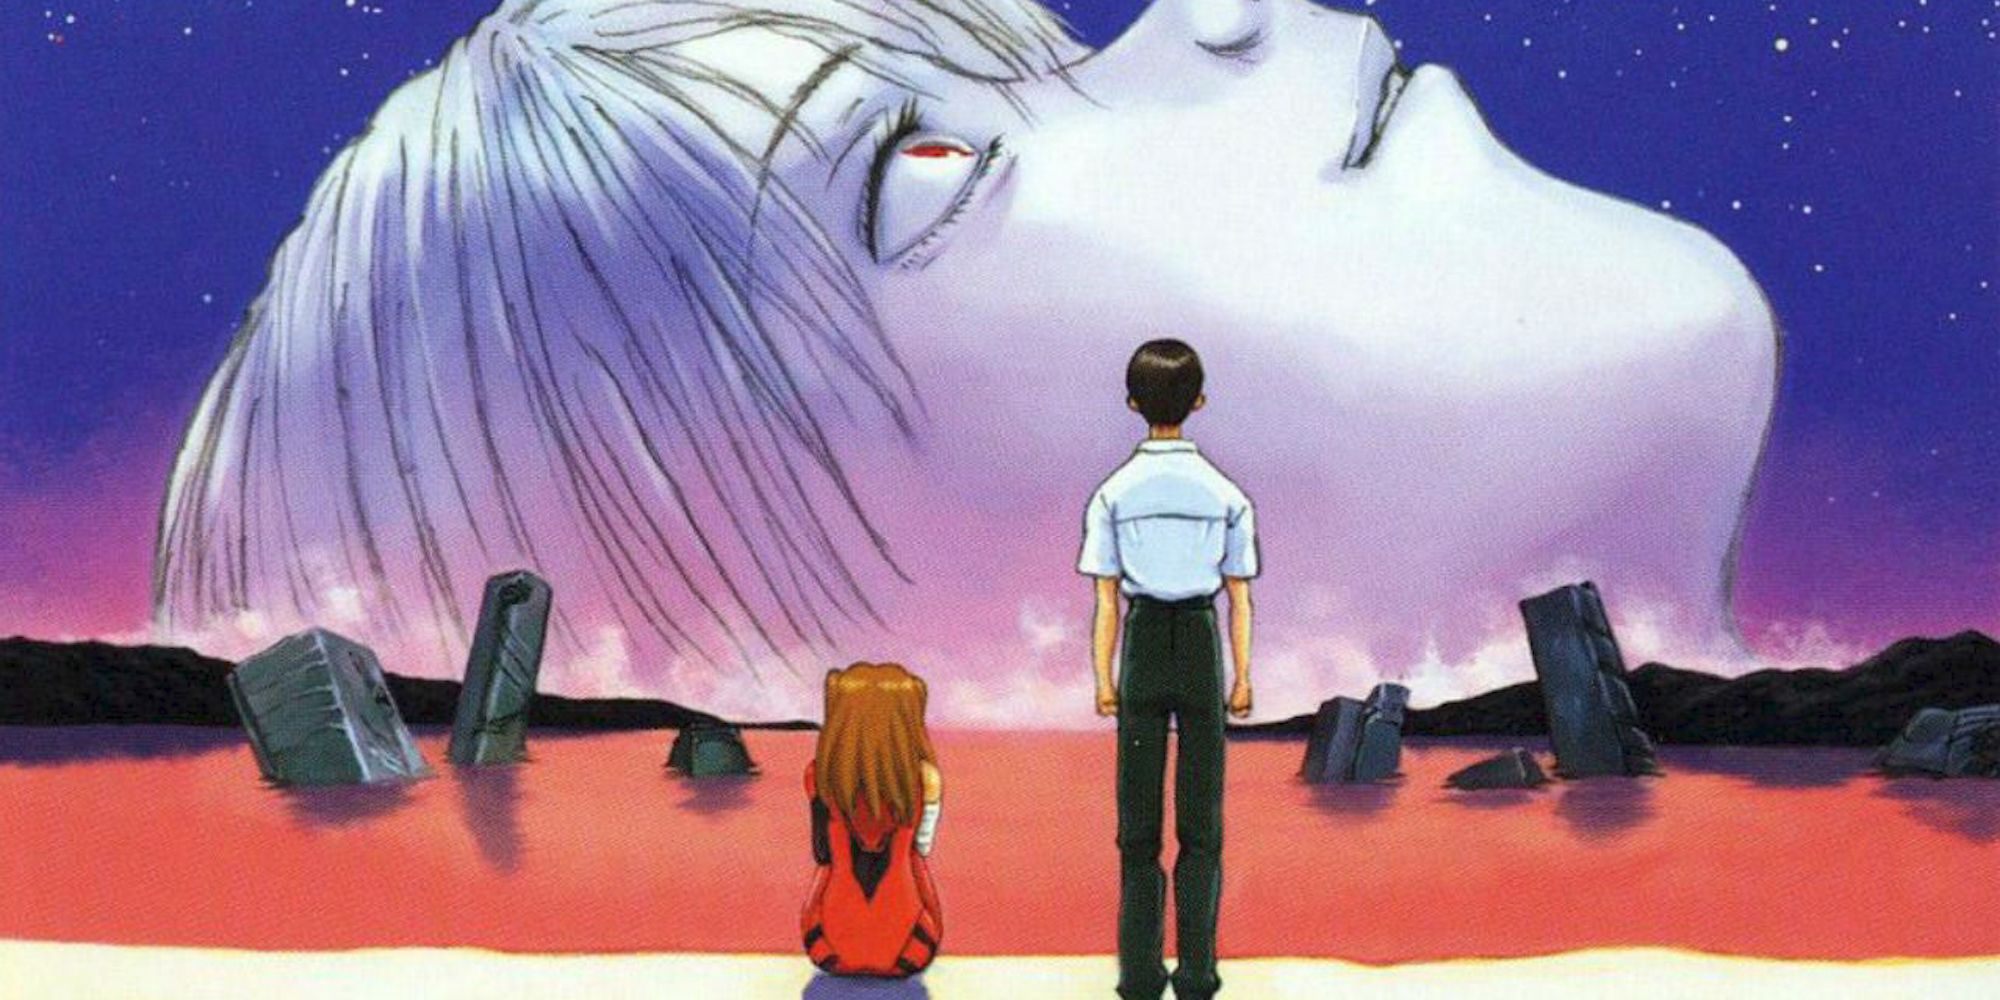 A boy and a girl look over a red body of water as a large face fills the night sky. 